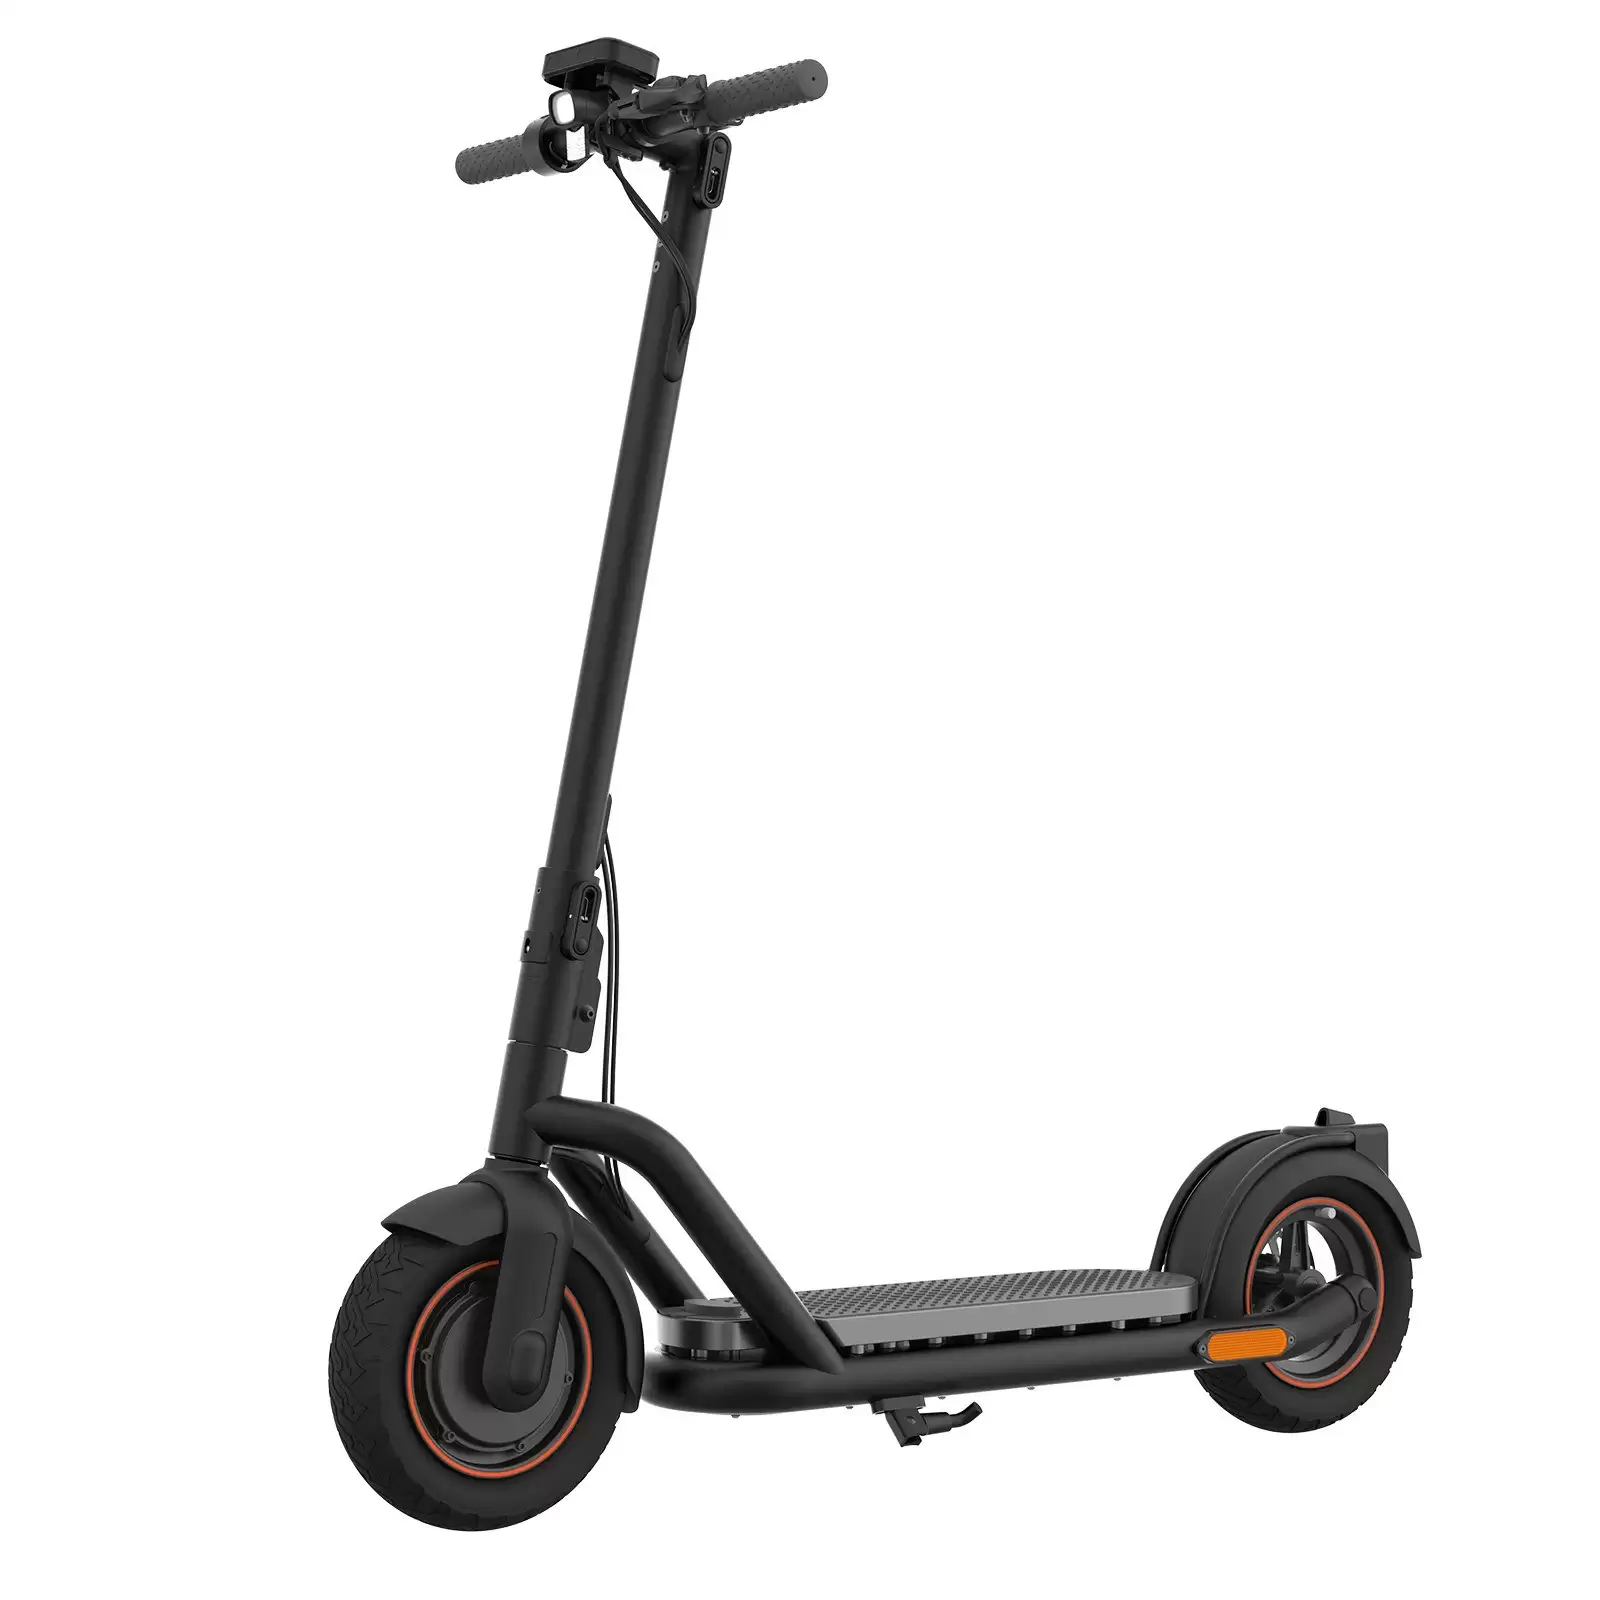 Order In Just $549 Navee N65 500w Motor 32km/h 10-inch Pneumatic Tires Electric Scooter With This Tomtop Discount Voucher